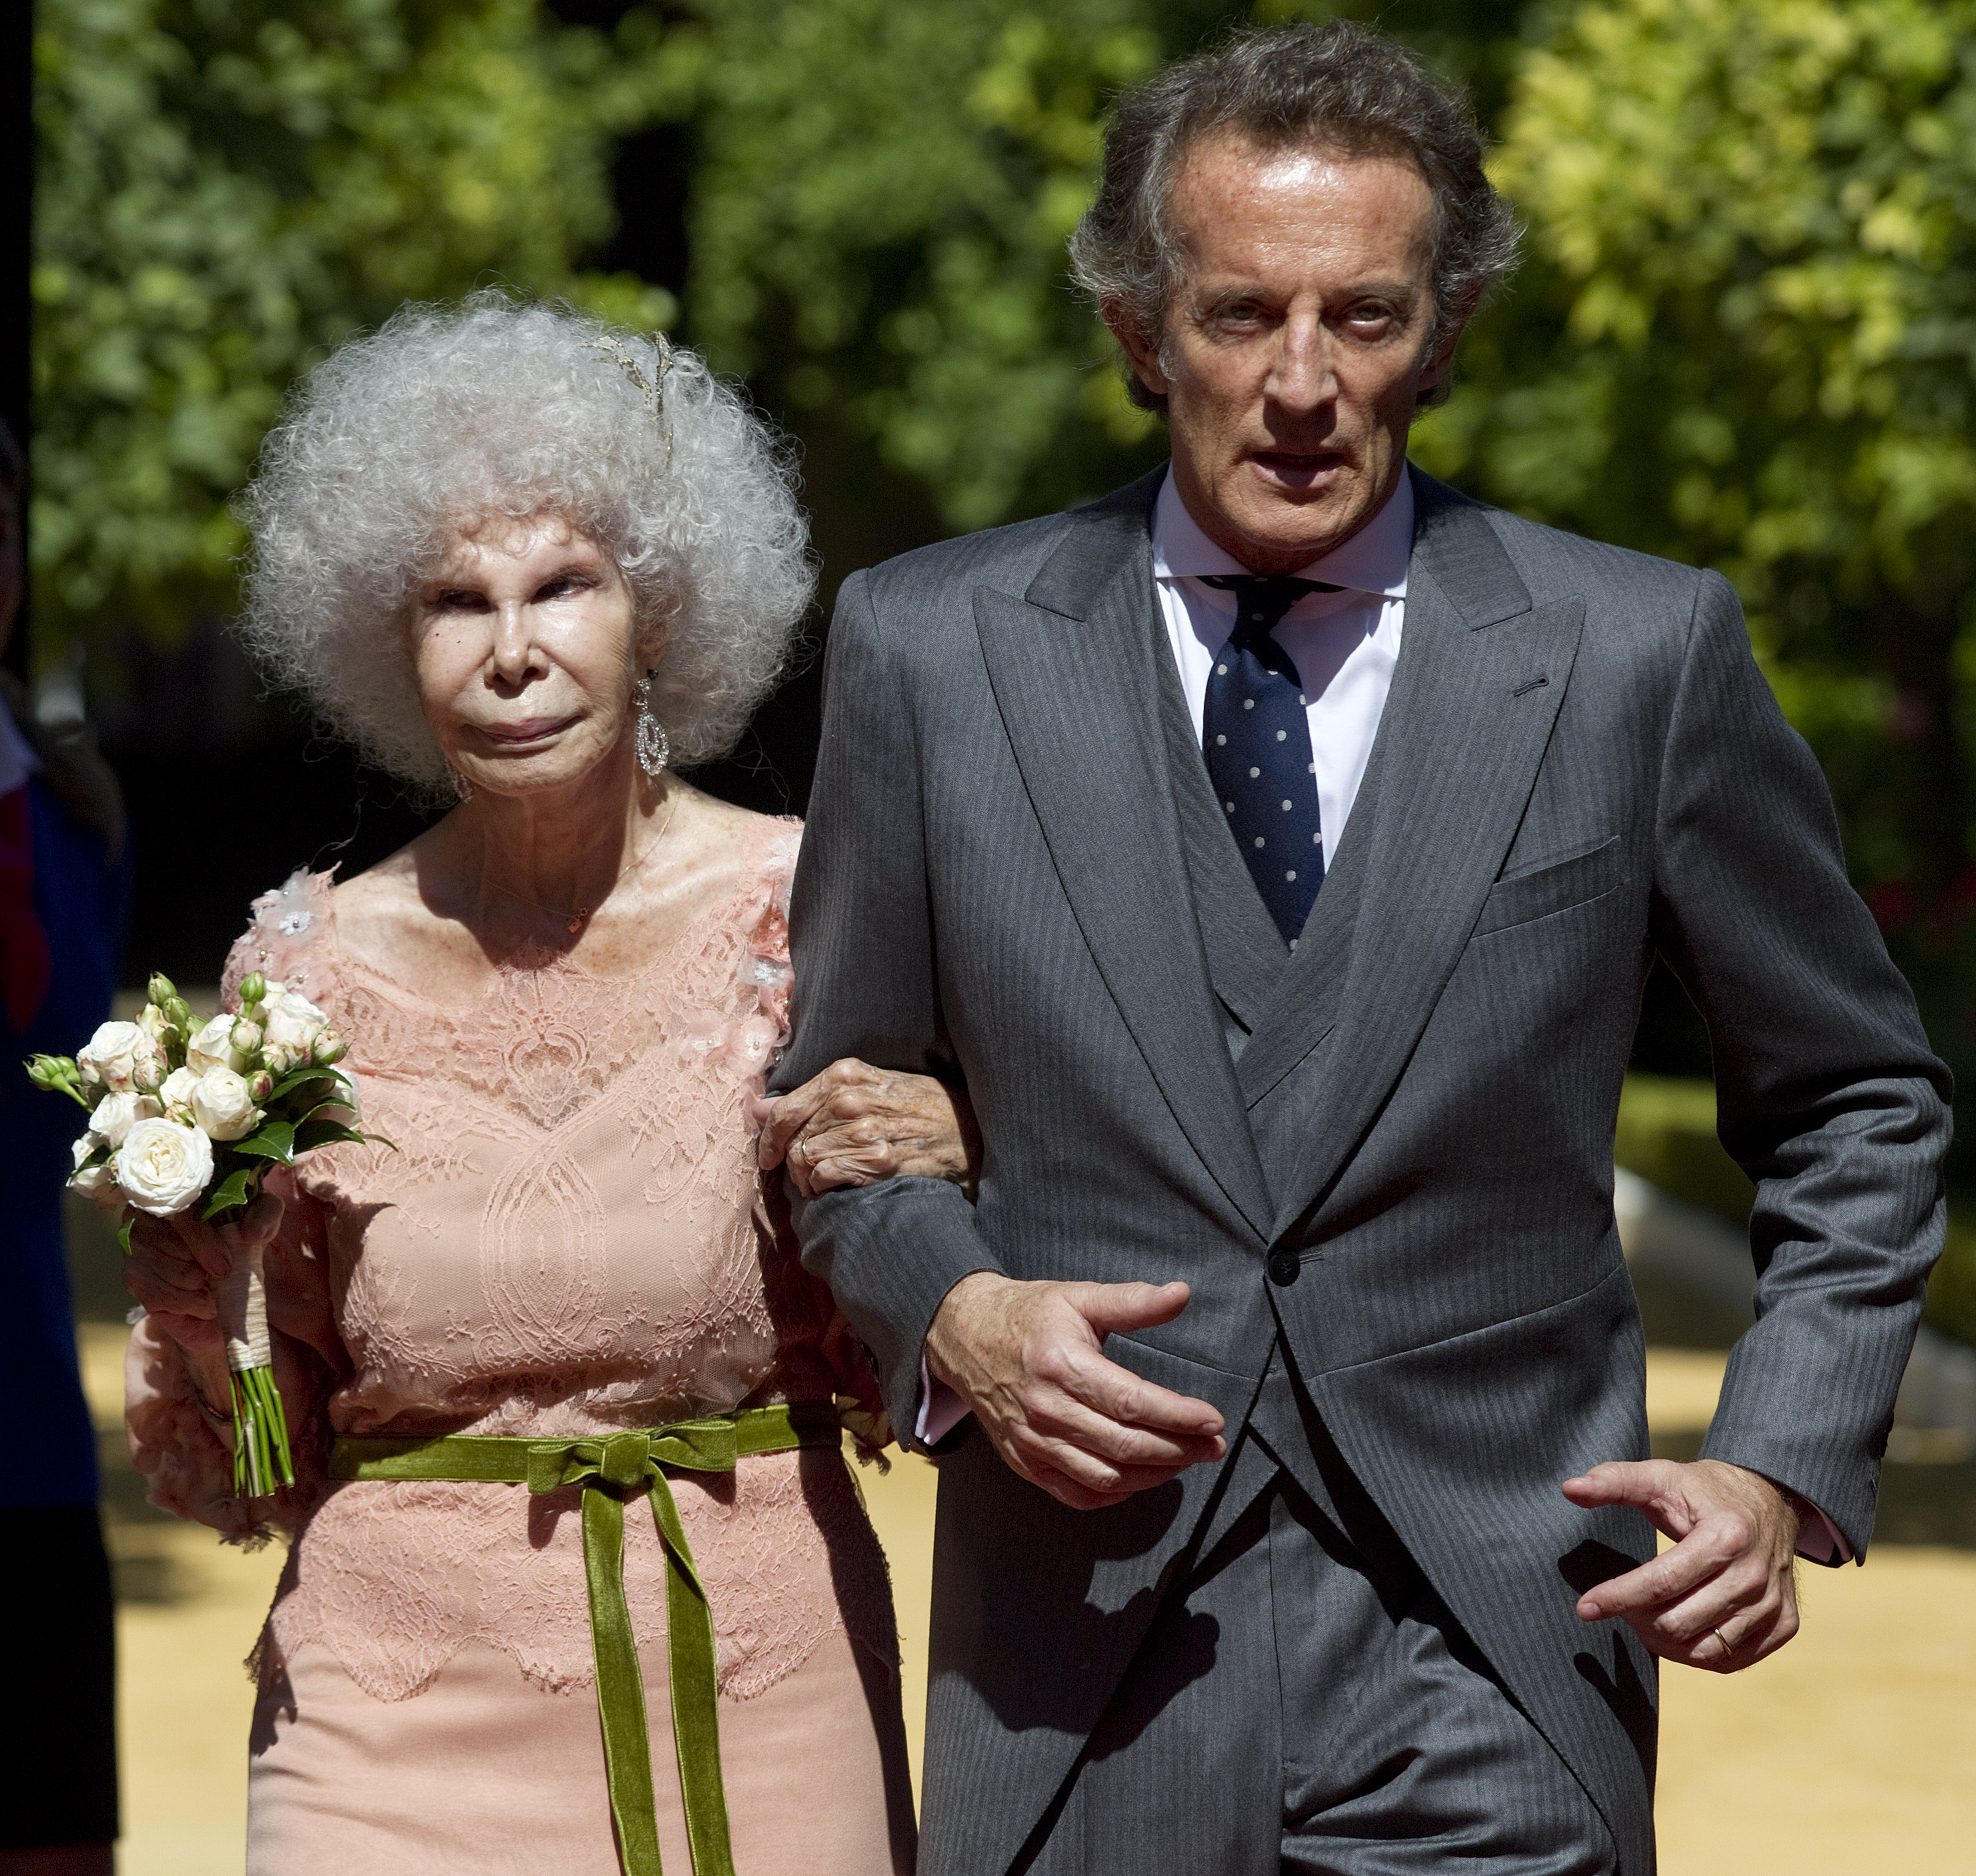 The Duchess of Alba, Maria del Rosario Cayetana Fitz-James-Stuart and Alfonso Diez on the day of their wedding in Seville, Spain on October 5, 2011 | Source: Getty Images